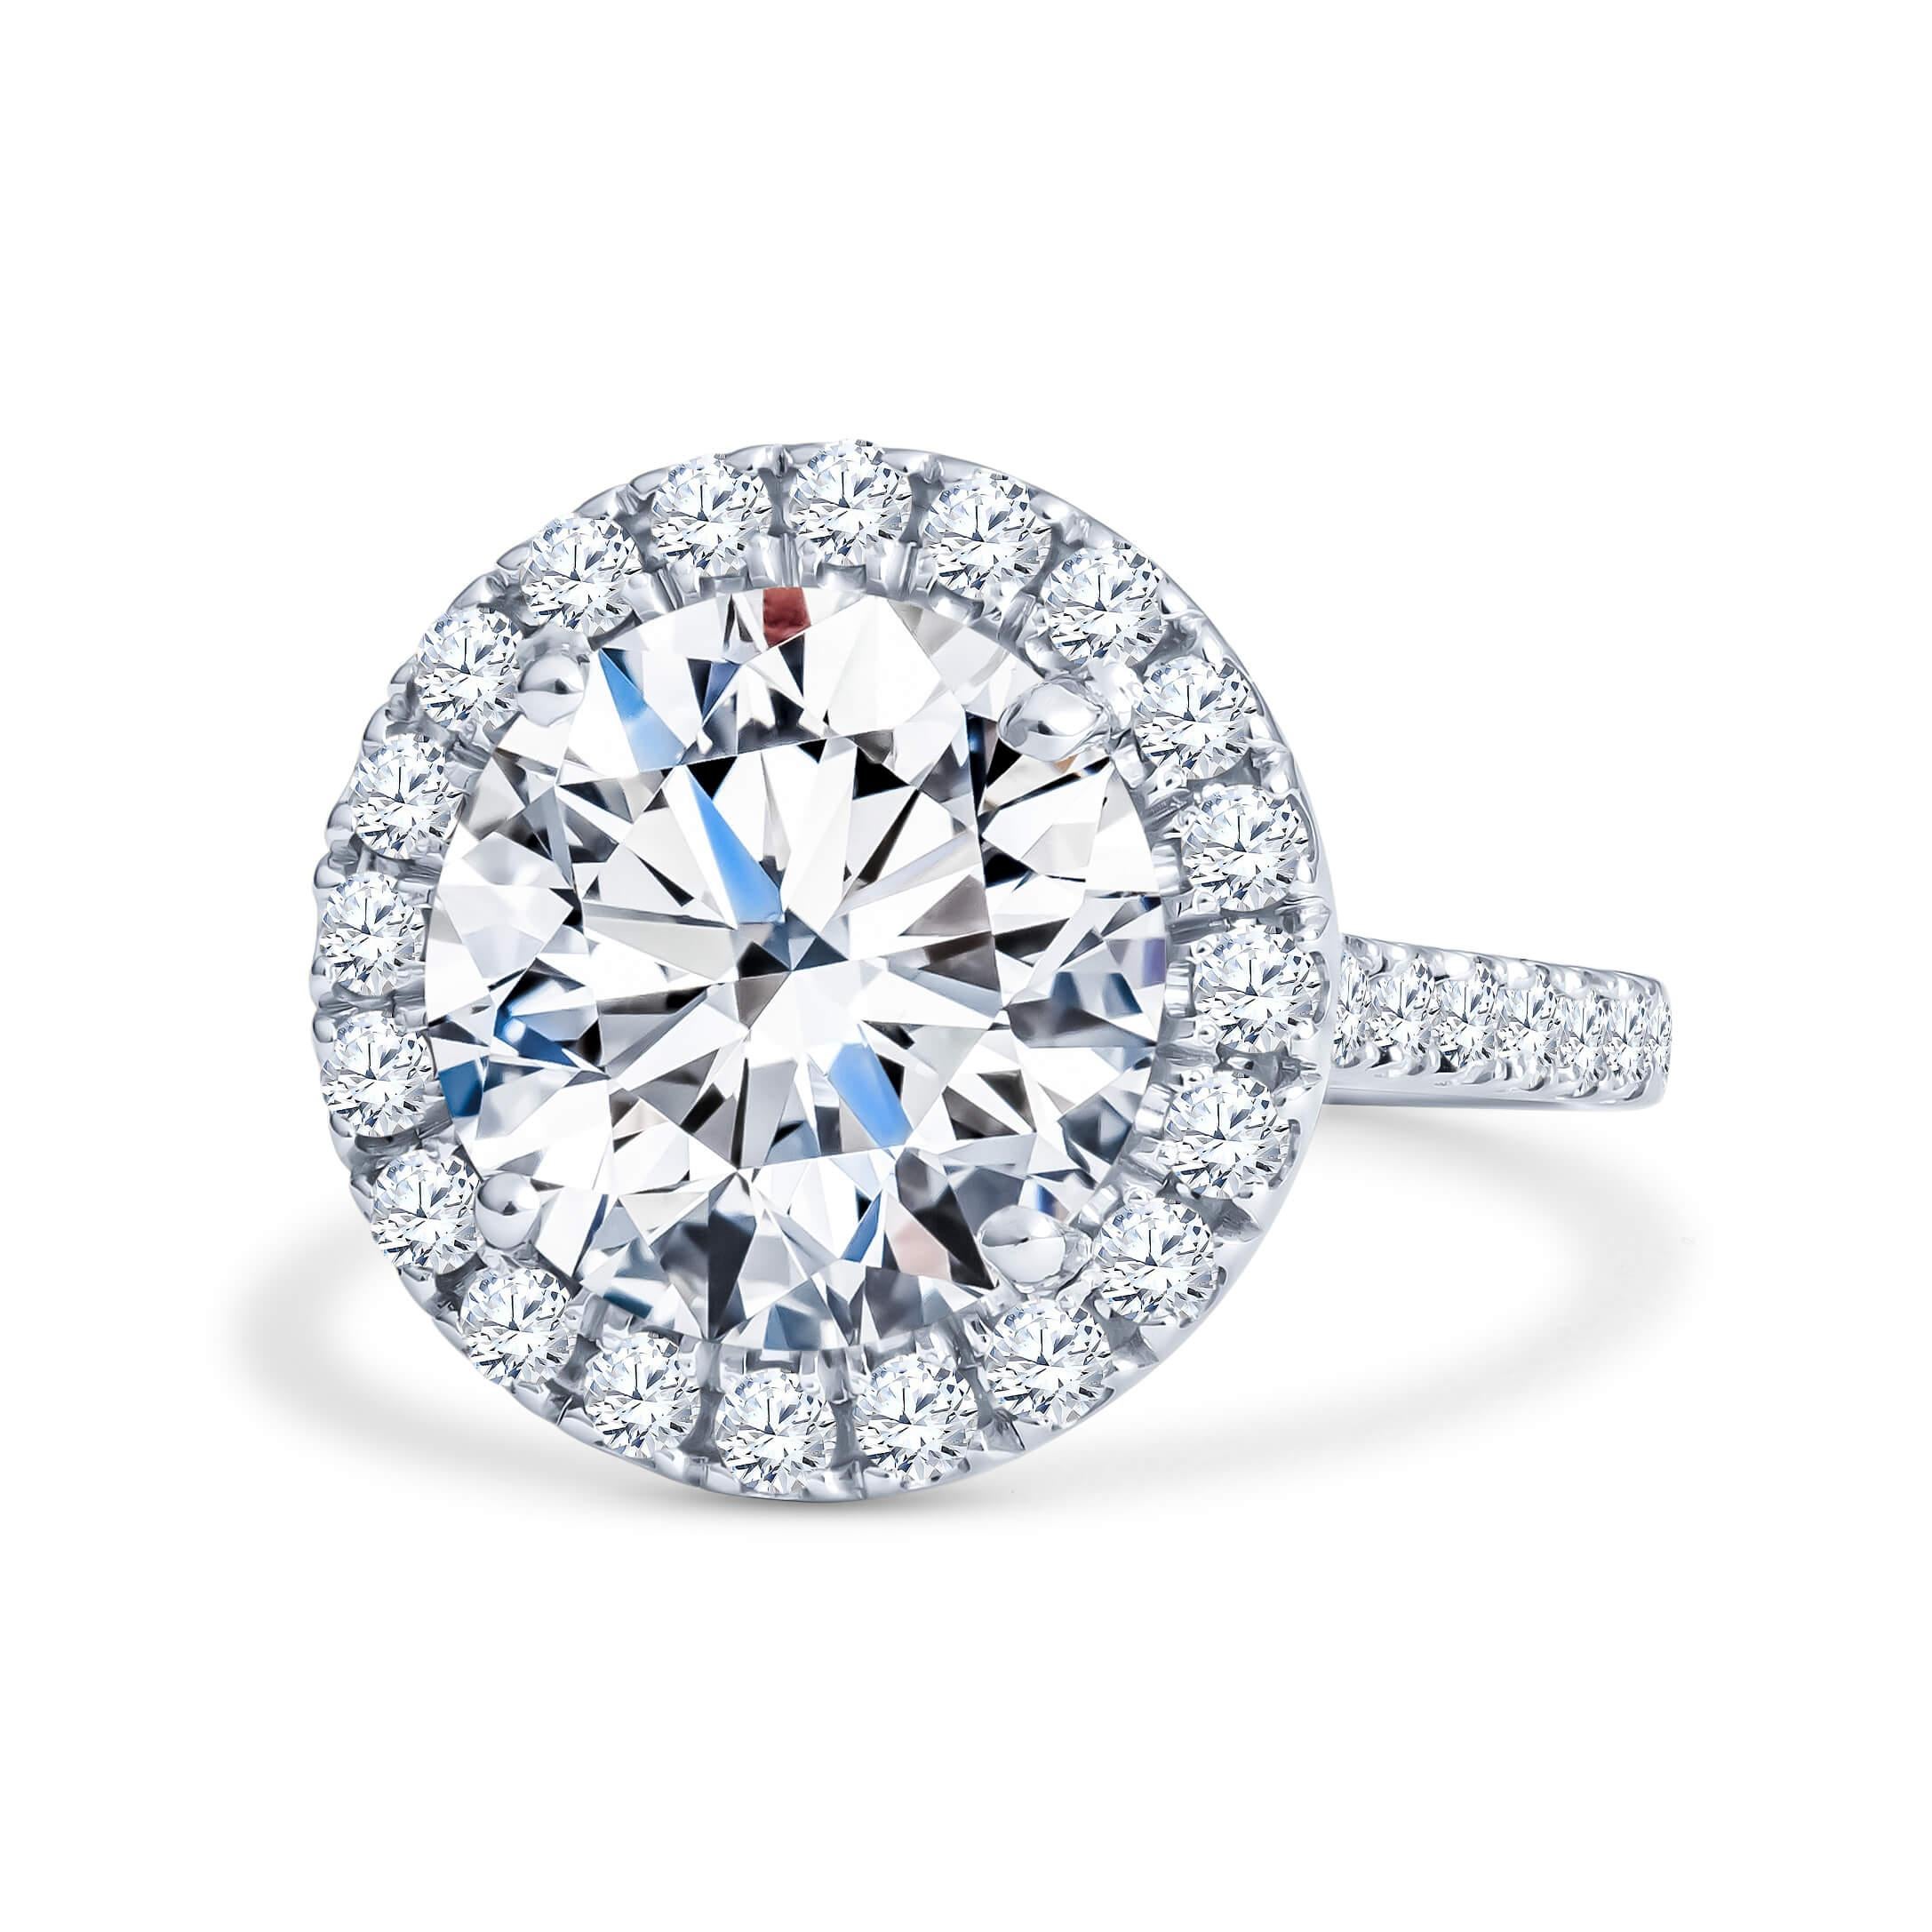 This engagement ring has a 5.75ct round brilliant cut diamond set in a 14kt white gold round halo ring and a 1.50ct total weight in round diamonds going halfway down. It has a 2.2mm shank and is a size 6 but can be resized upon request. The center